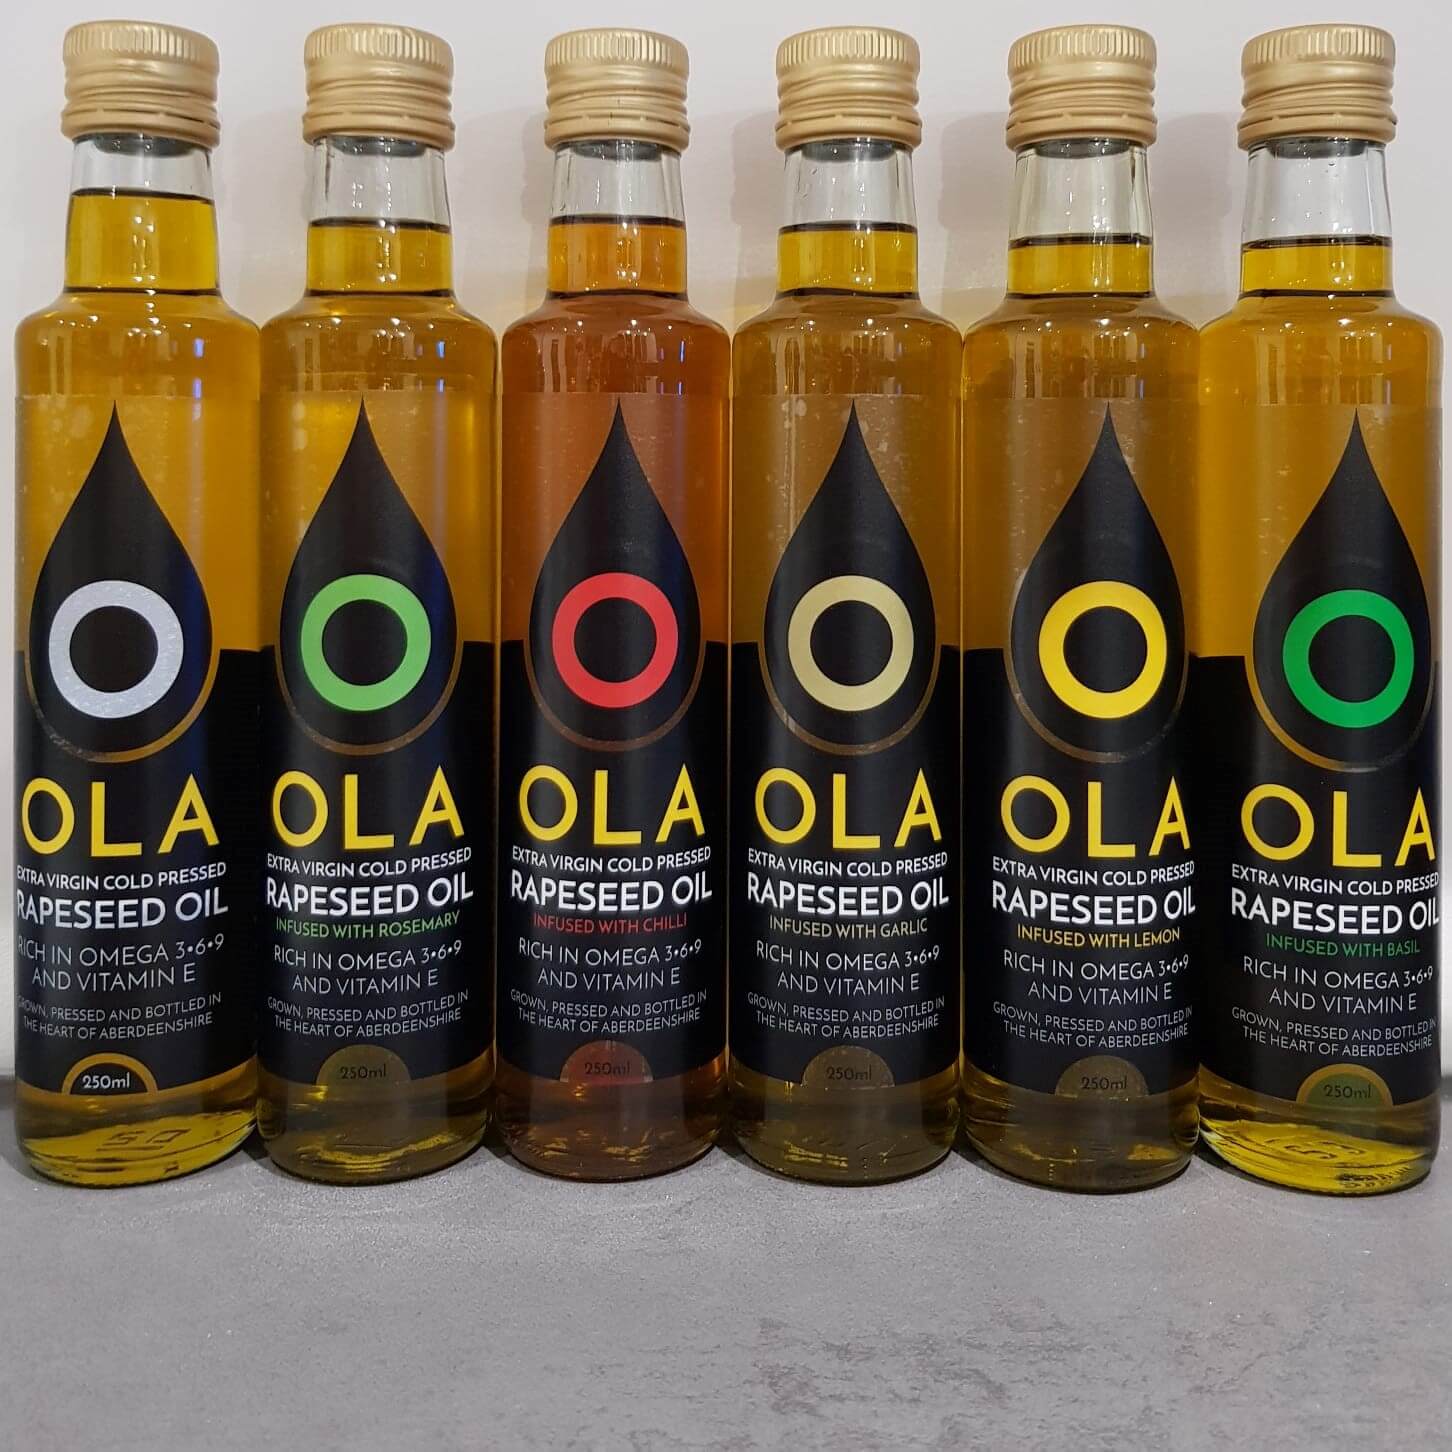 Image of Ola Infused Rapseed Oil, designed, produced or made in the UK. Buying this product supports a UK business, jobs and the local community.